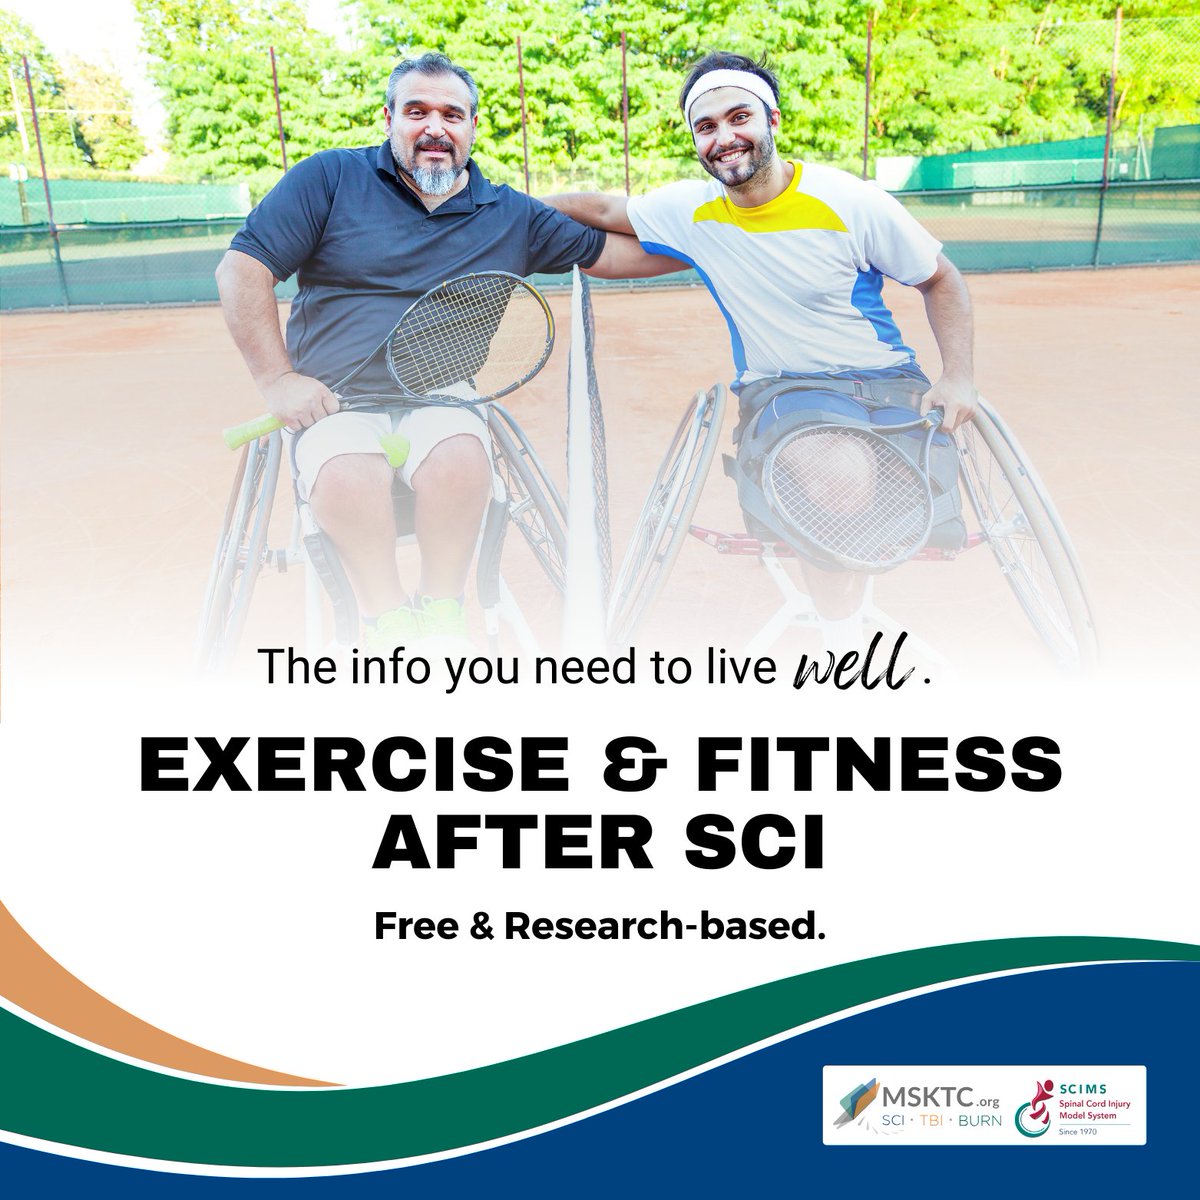 Even if you have never taken part in sports before, you can find an adaptive activity that is right for you! Learn more about #adaptivesports after #SCI here. msktc.org/sci/factsheets…